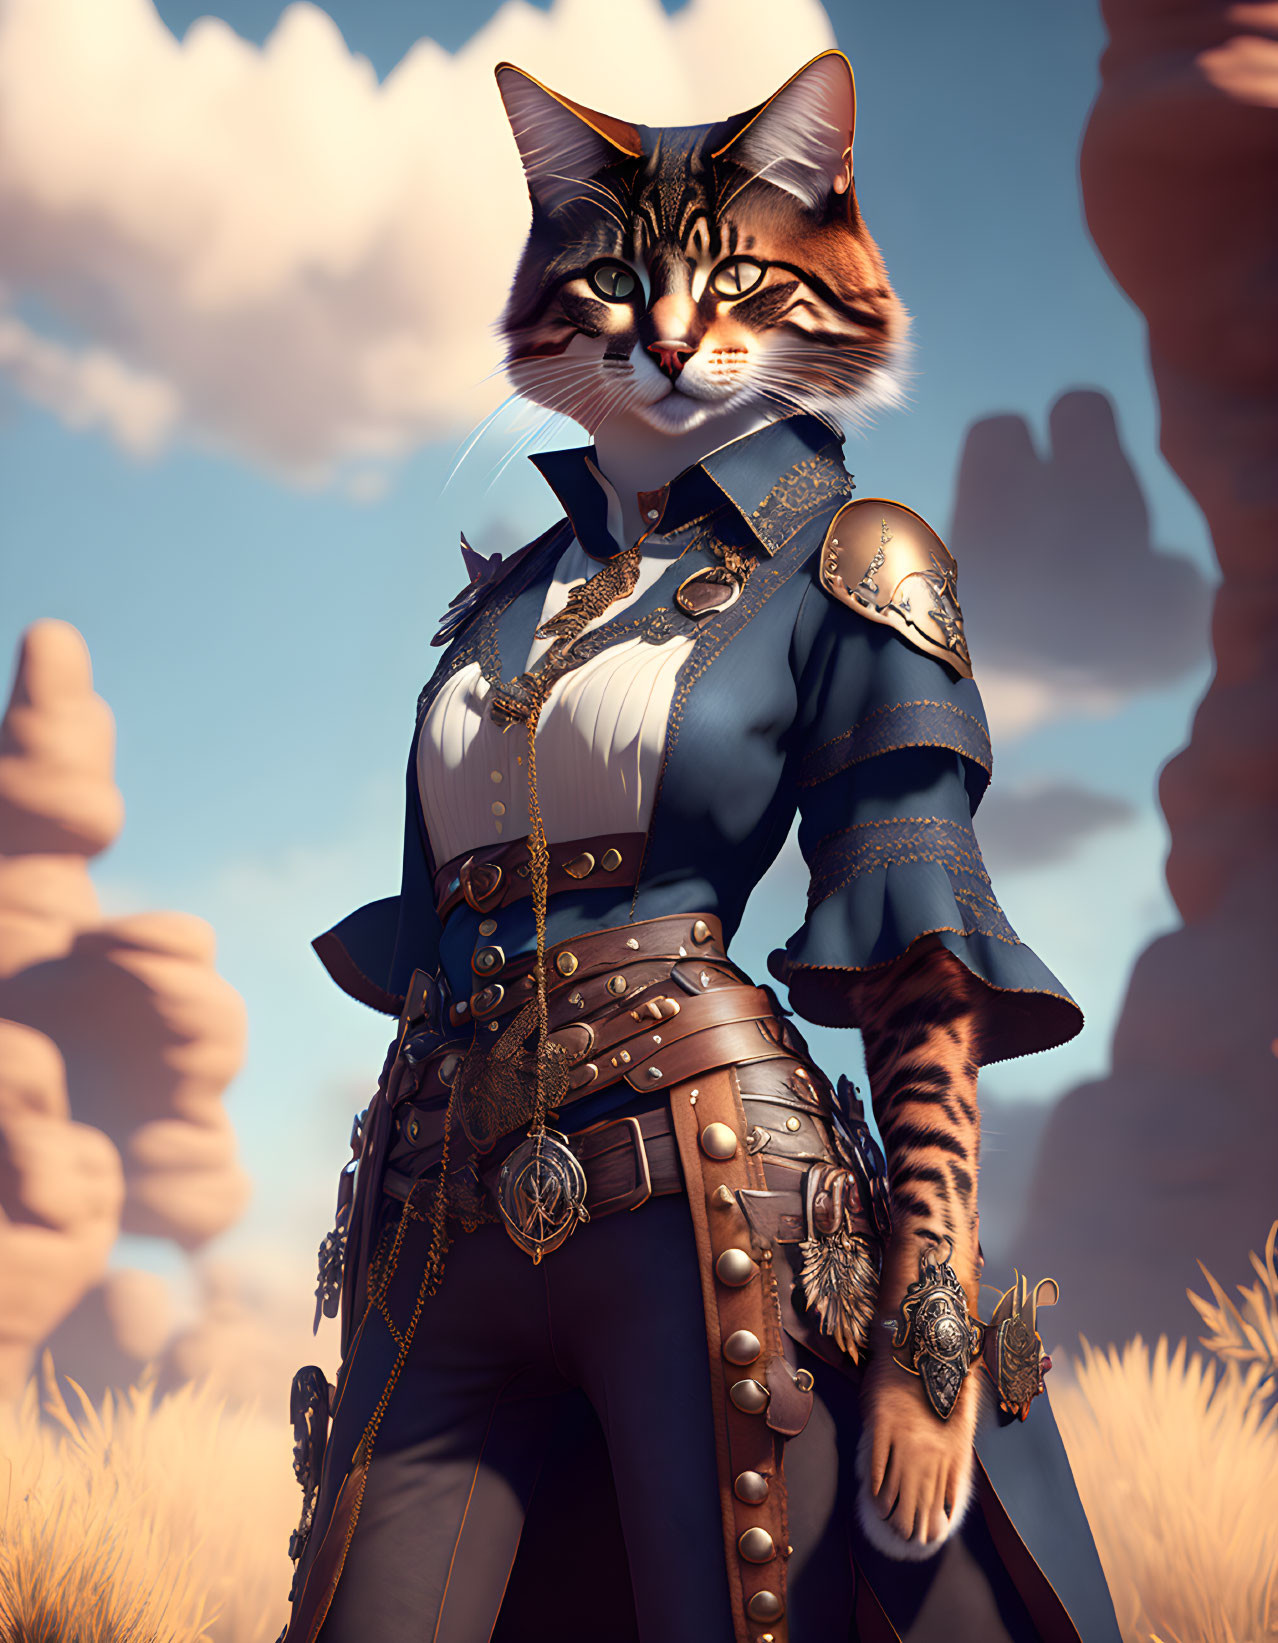 Anthropomorphic cat in fantasy outfit against sky and rock backdrop